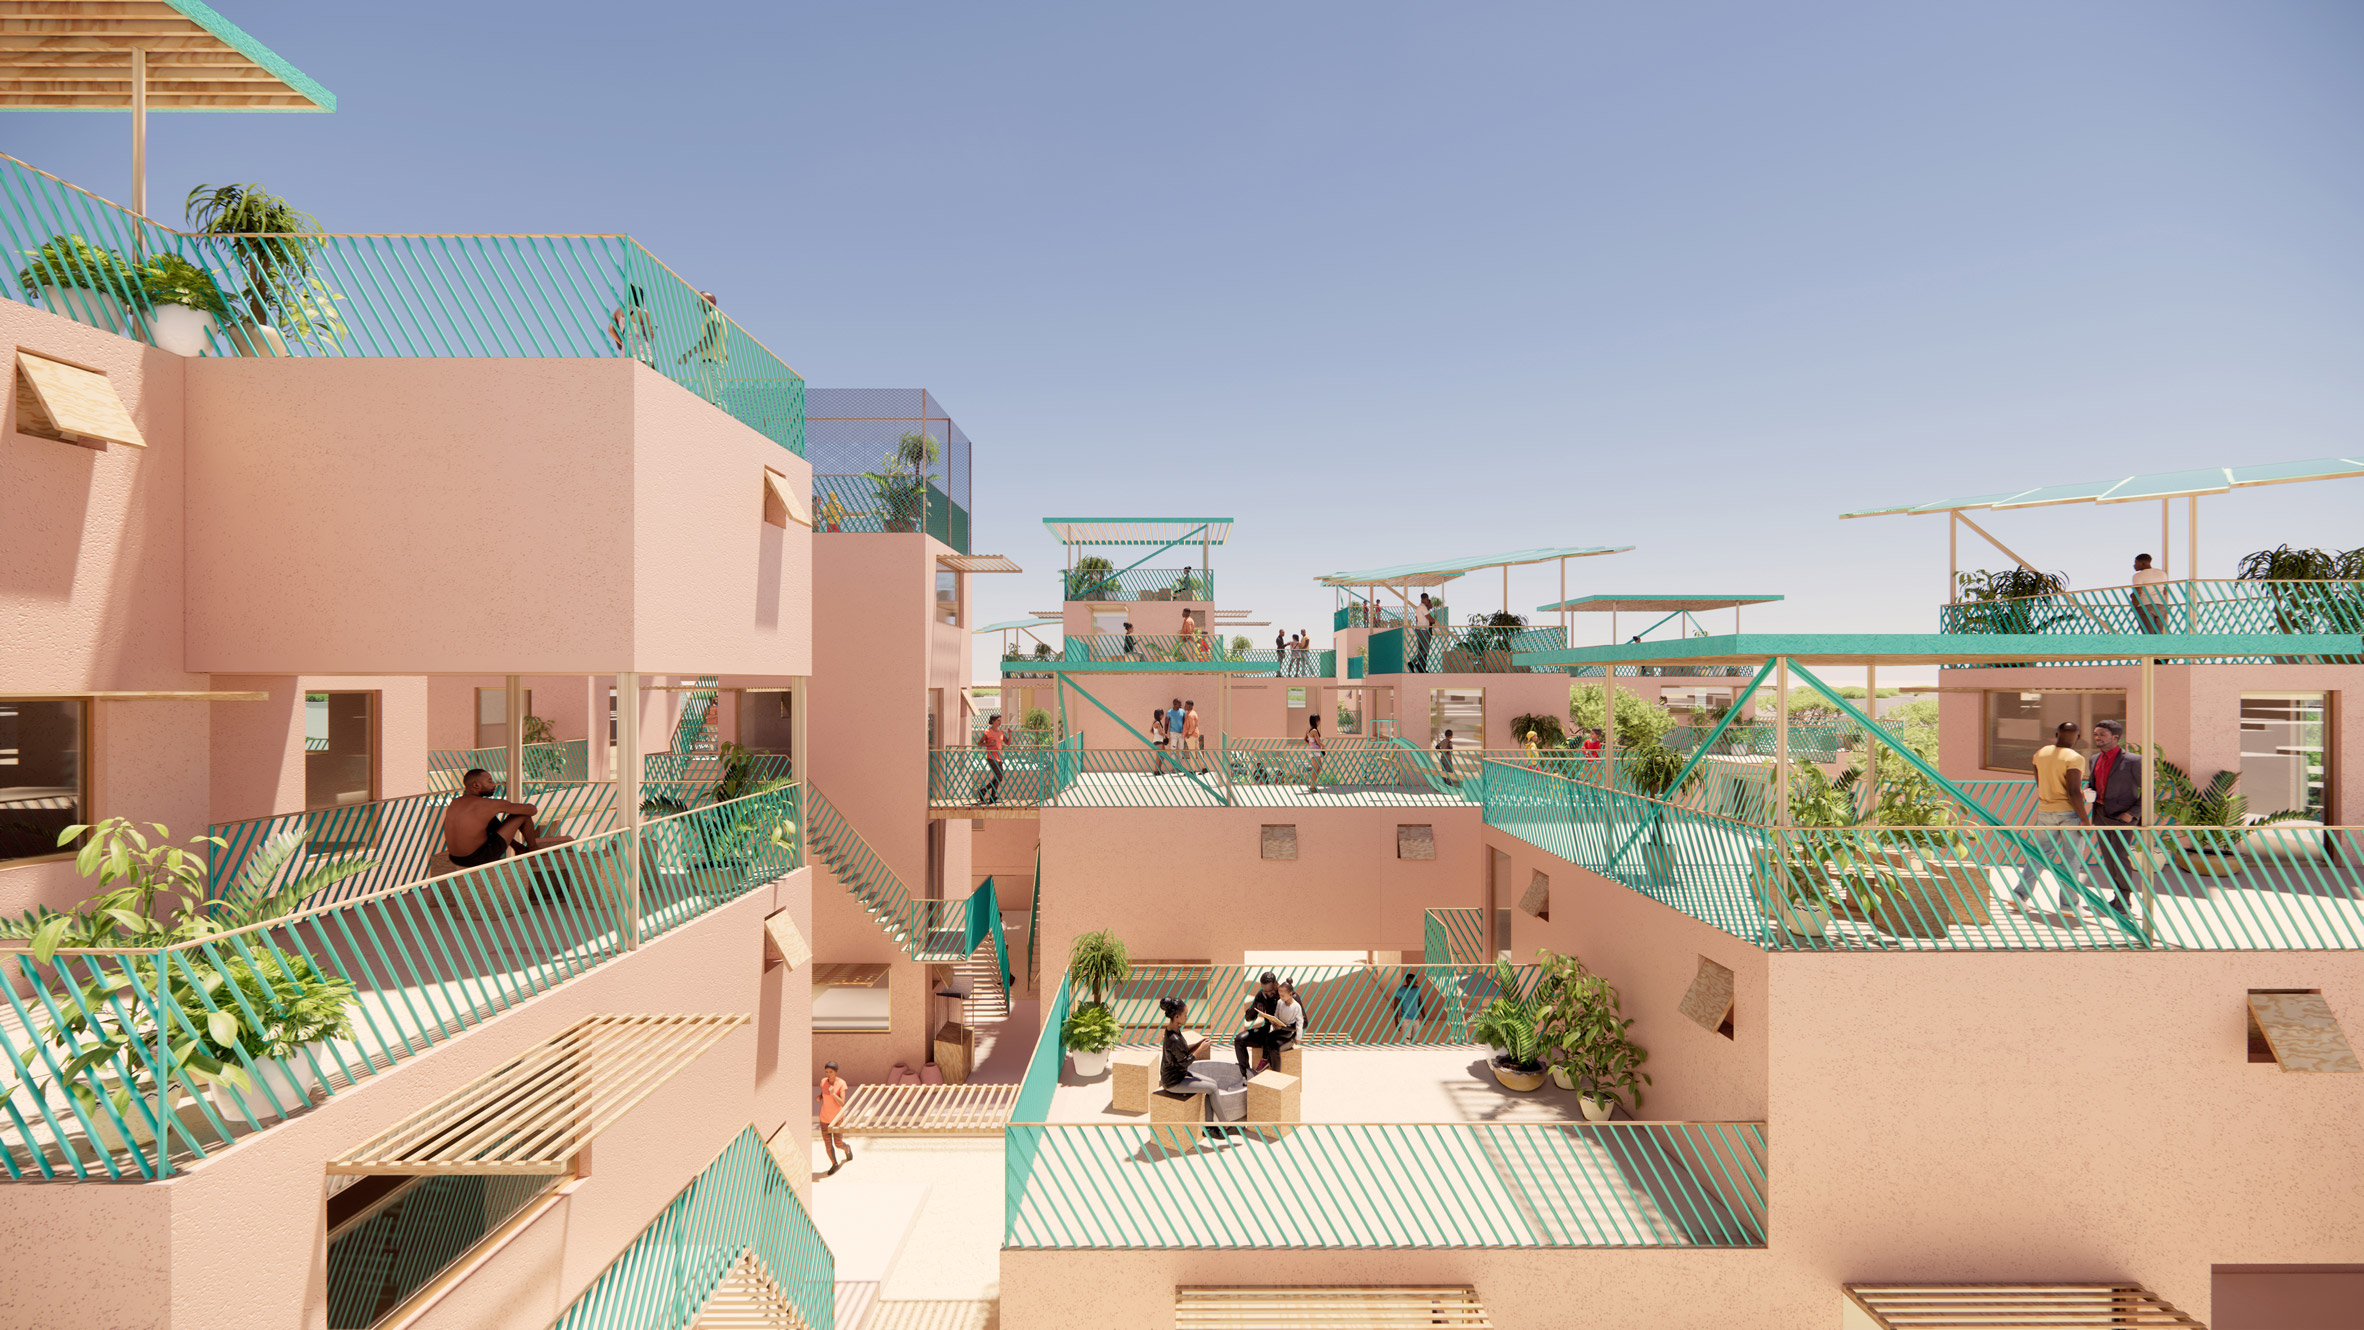 Neighbourhood of recycled plastic houses by Julien de Smedt and Othalo